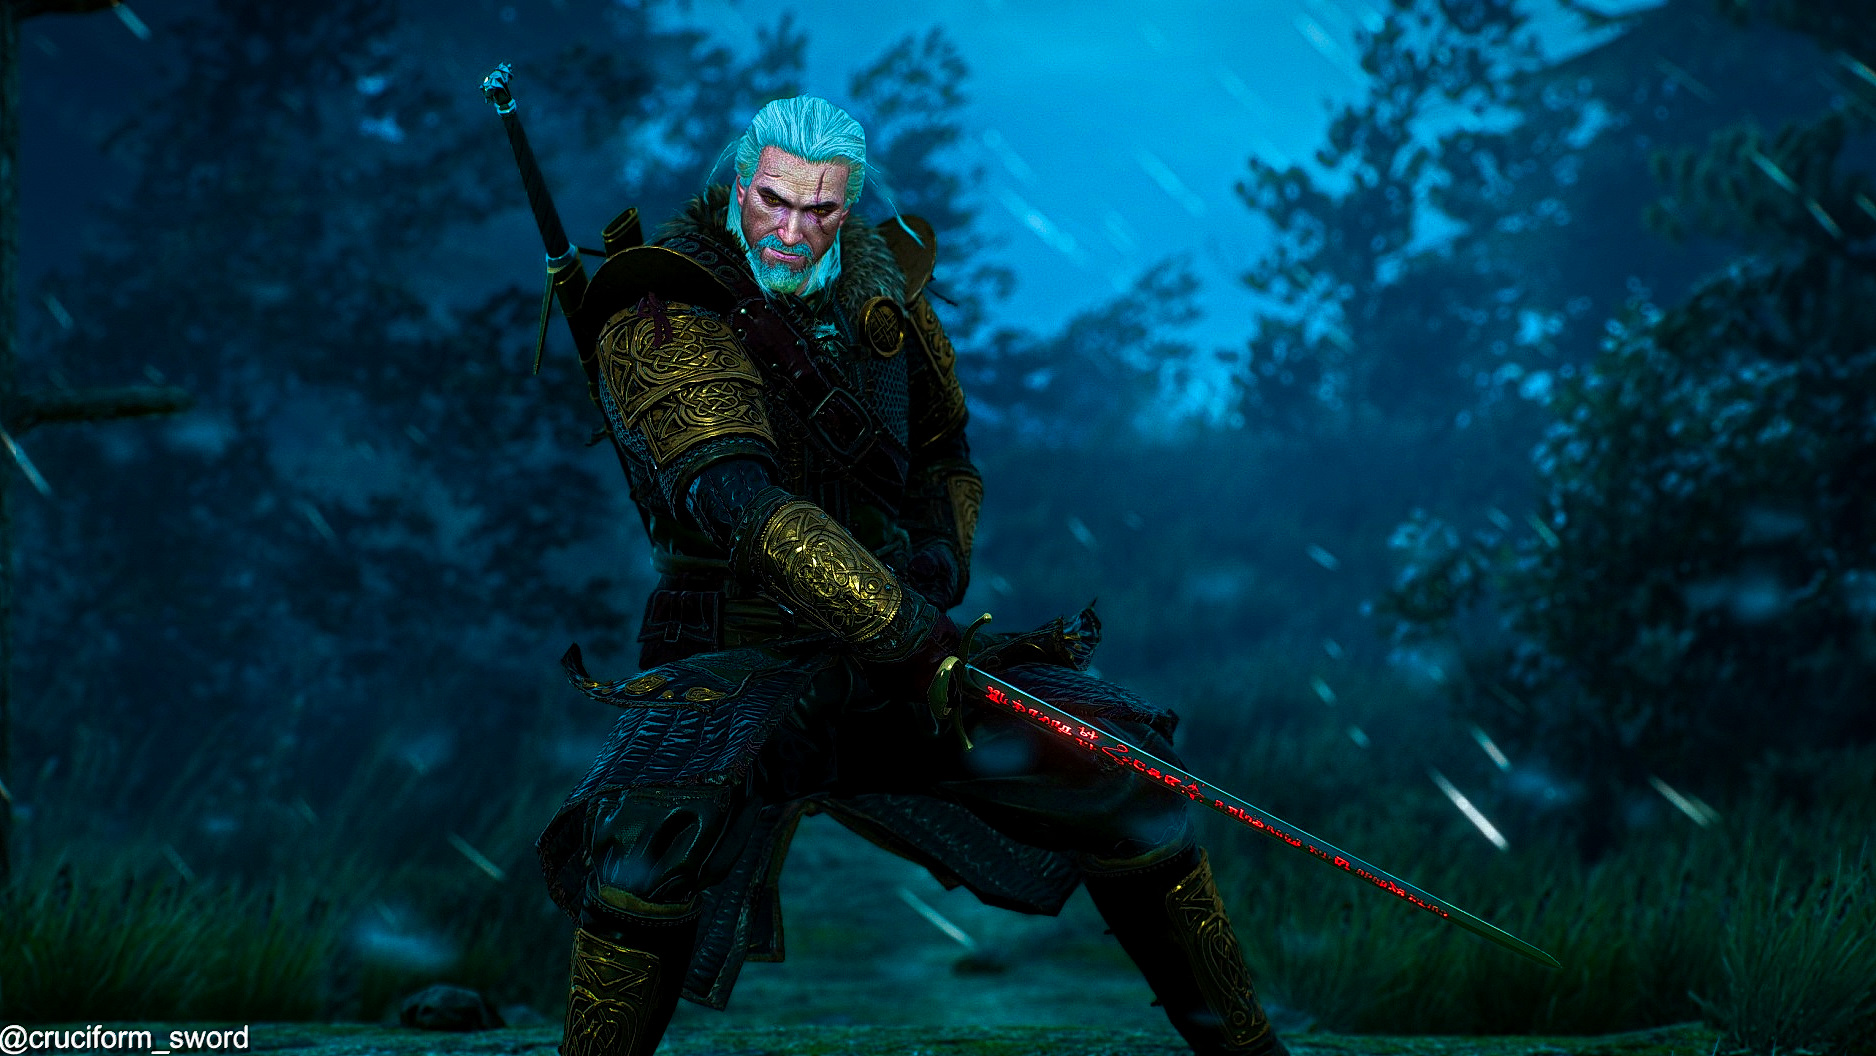 General 1876x1056 The Witcher The Witcher 3: Wild Hunt Games posters video games screen shot video game art Geralt of Rivia